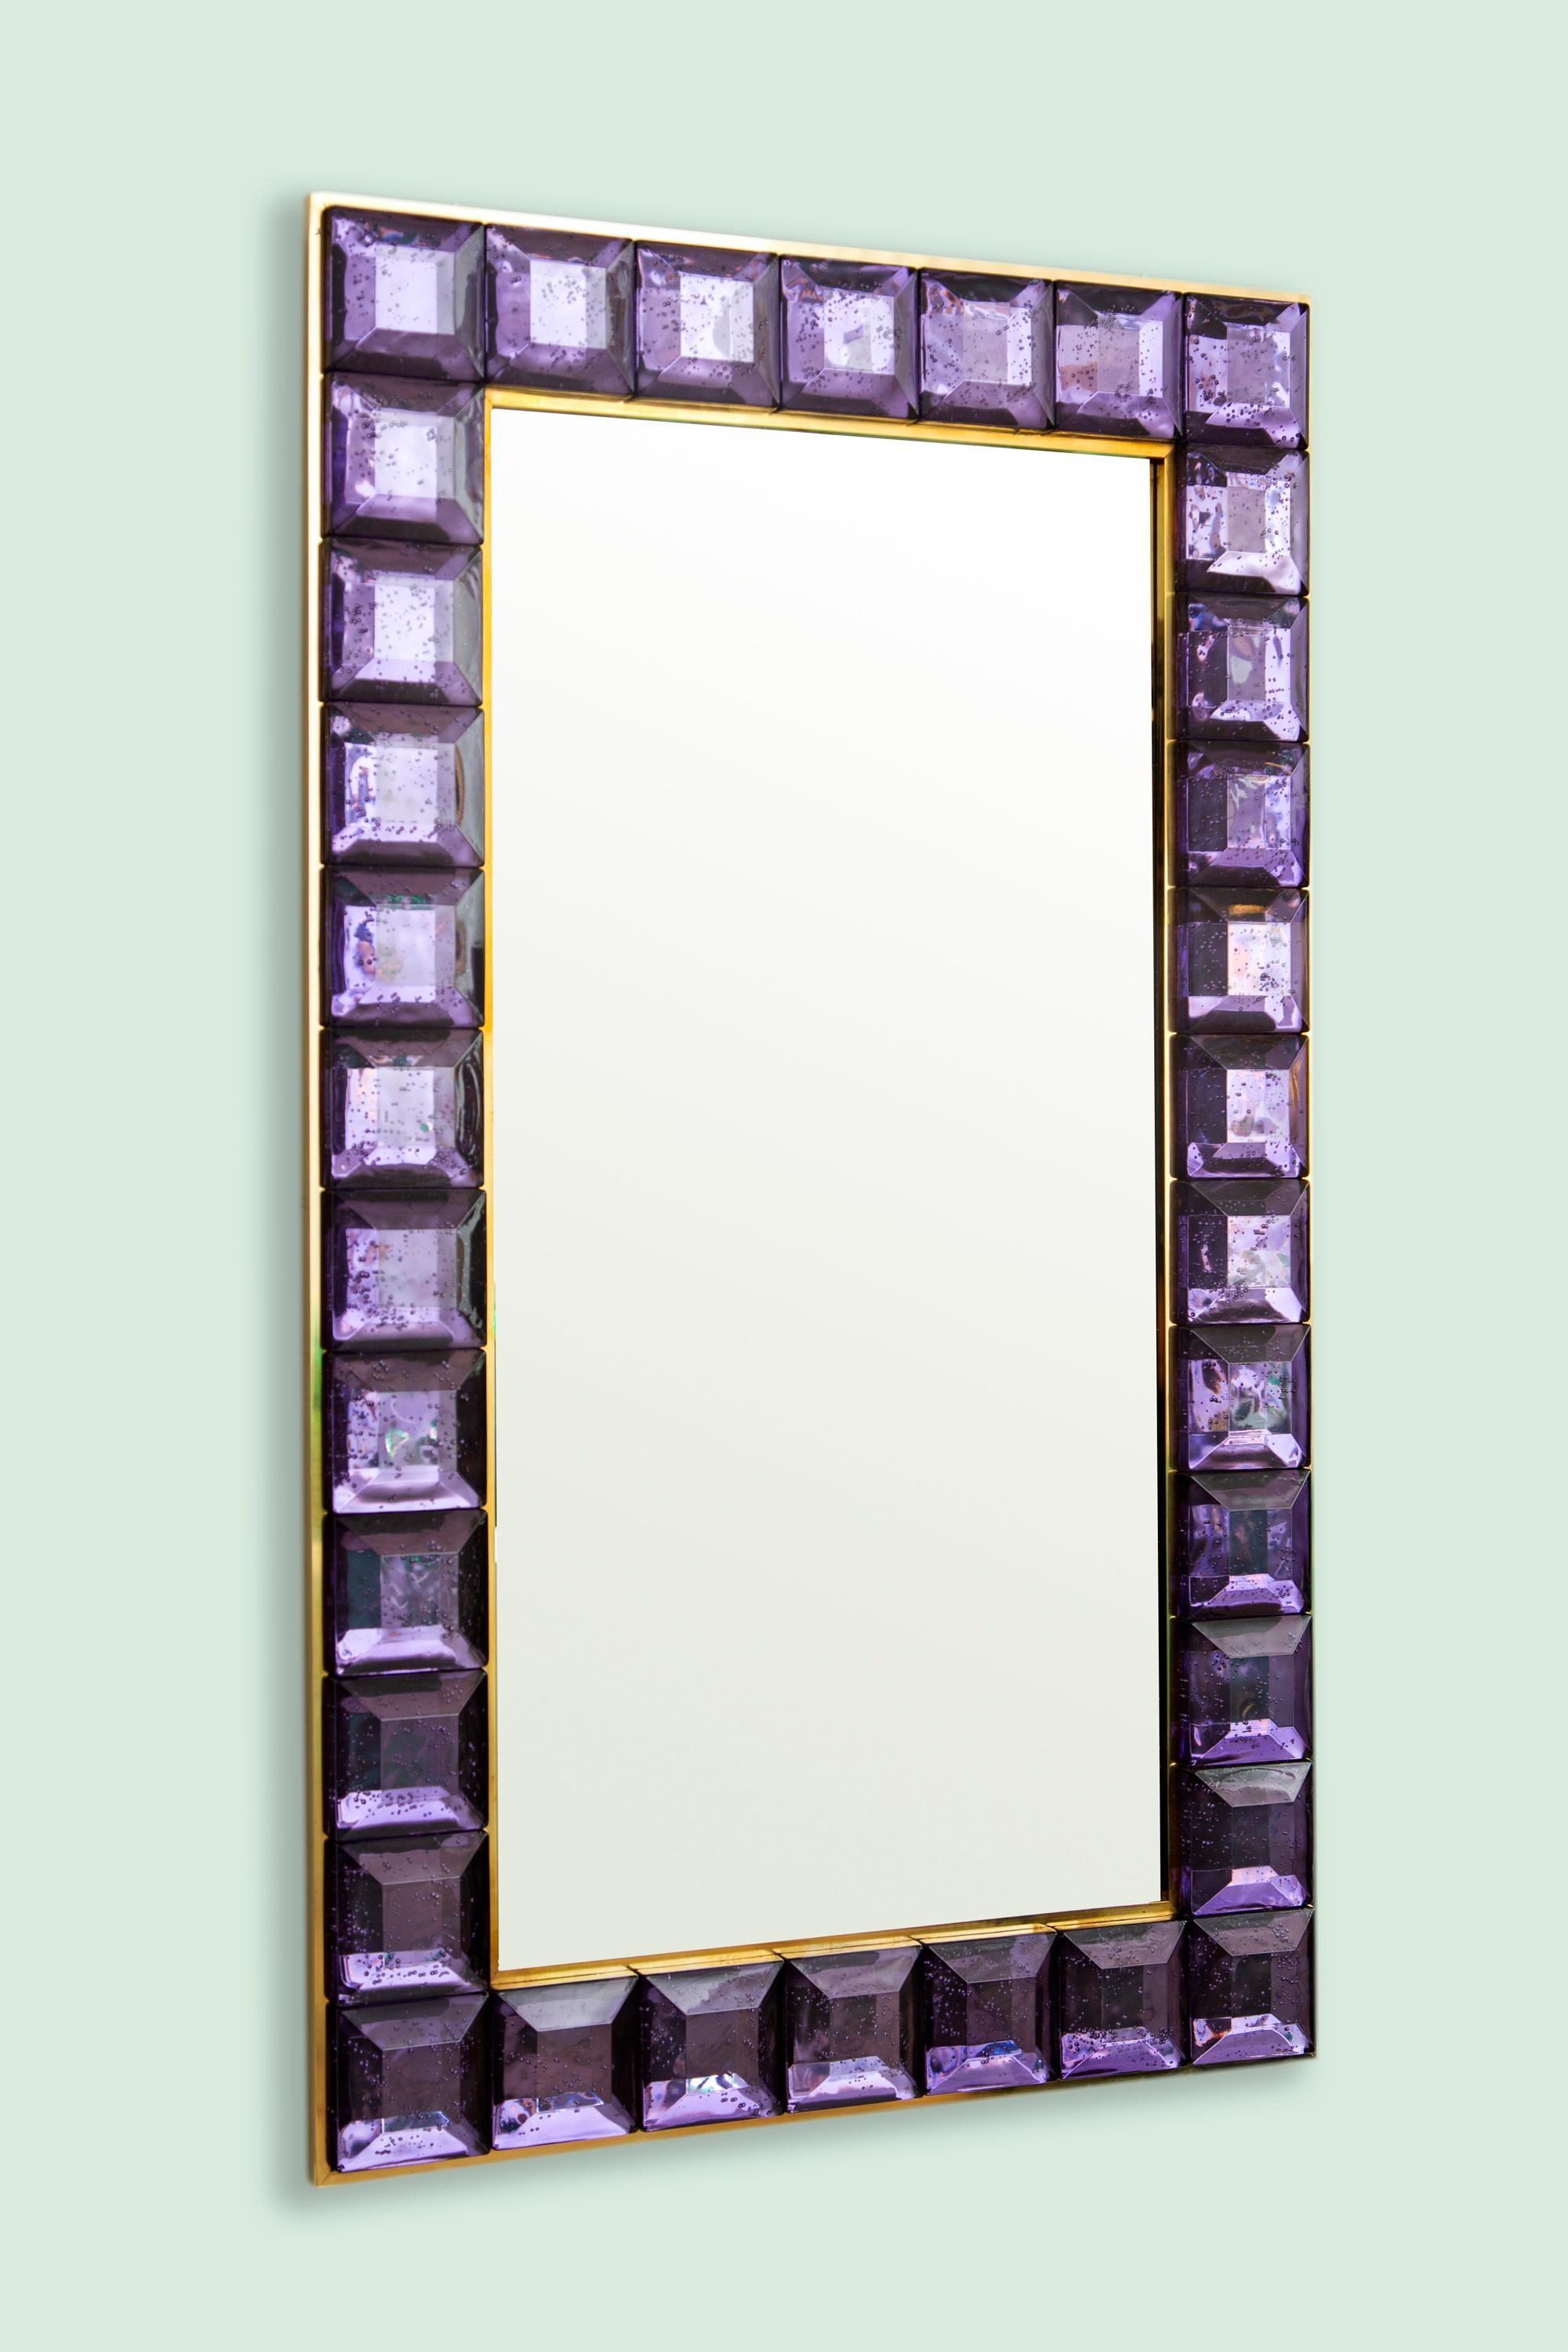 Contemporary amethyst square diamond cut Murano glass mirror (2 available), in stock
Vivid and intense amethyst glass block with naturally occurring air inclusions throughout 
 Highly polished faceted pattern
 Brass gallery
 Luxury handcrafted